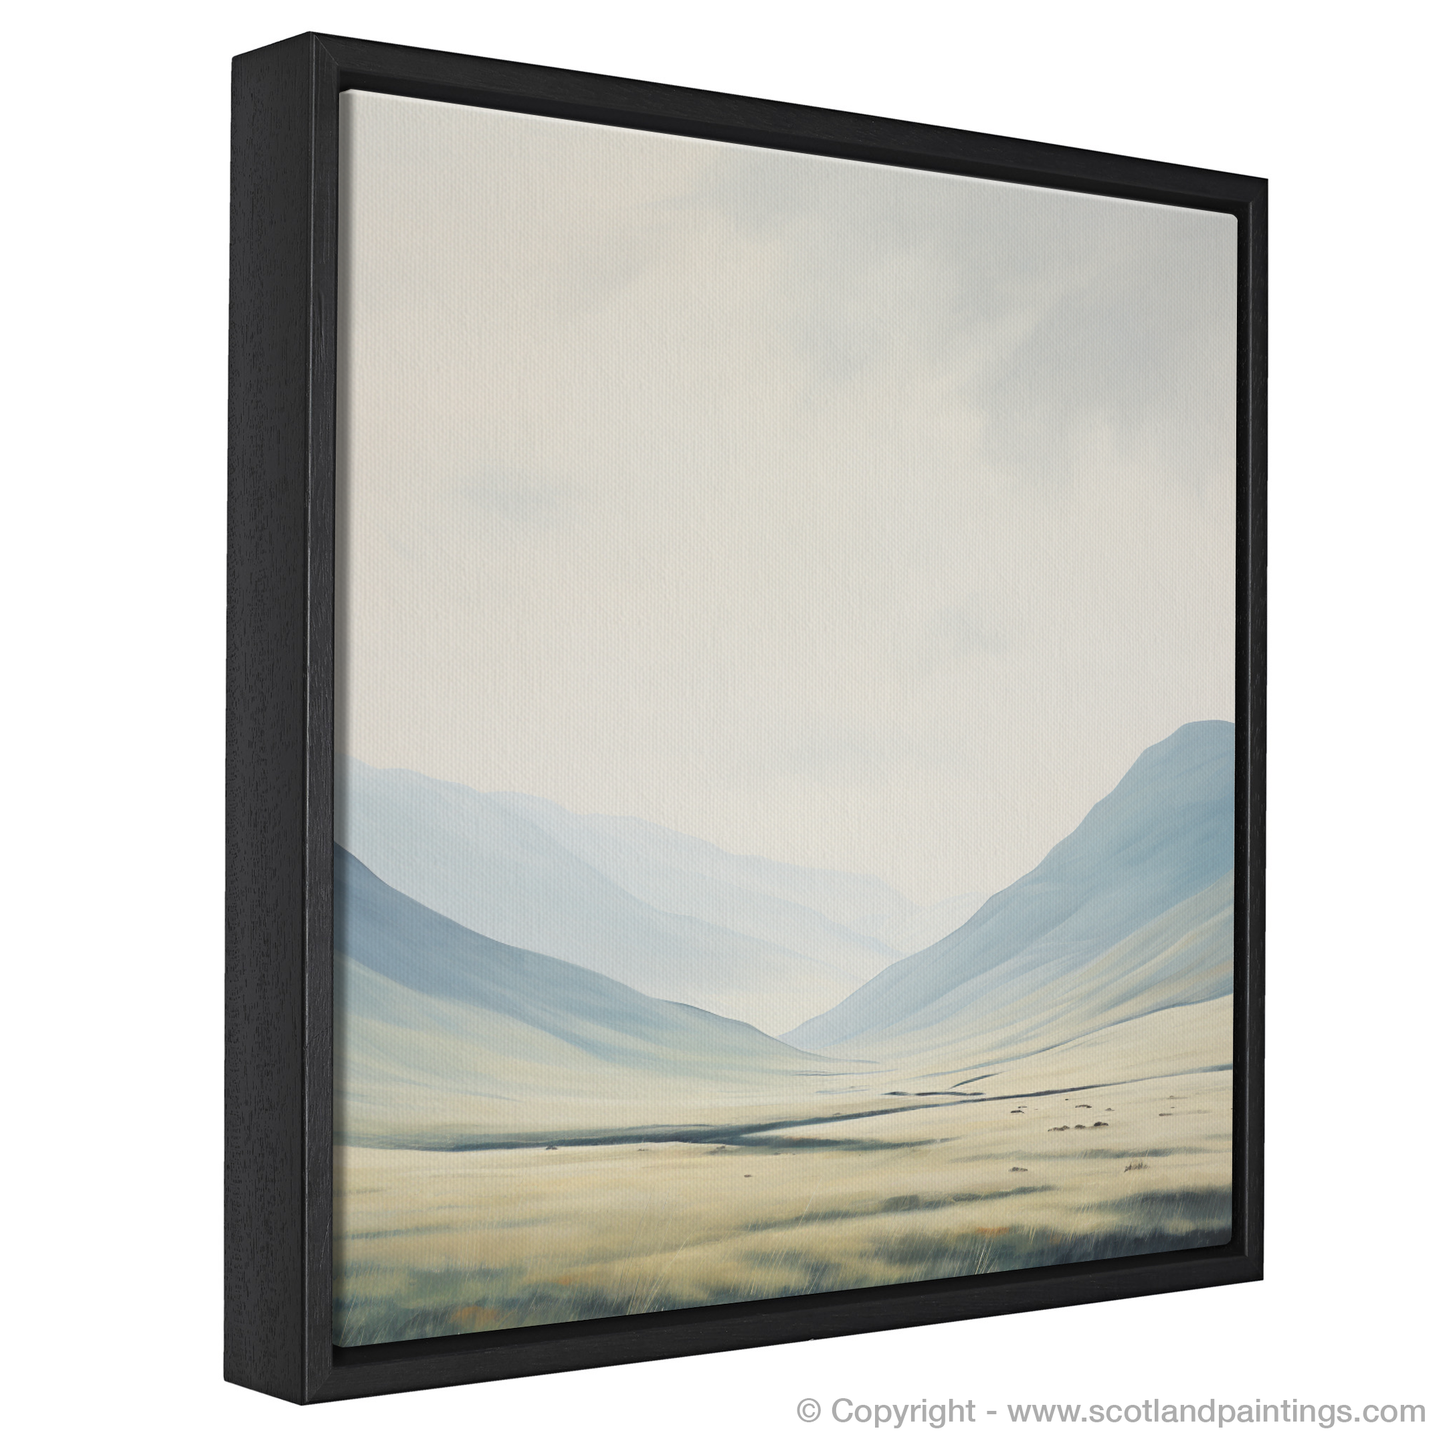 Painting and Art Print of The Cairnwell entitled "The Cairnwell Whispers: An Abstract Highland Symphony".